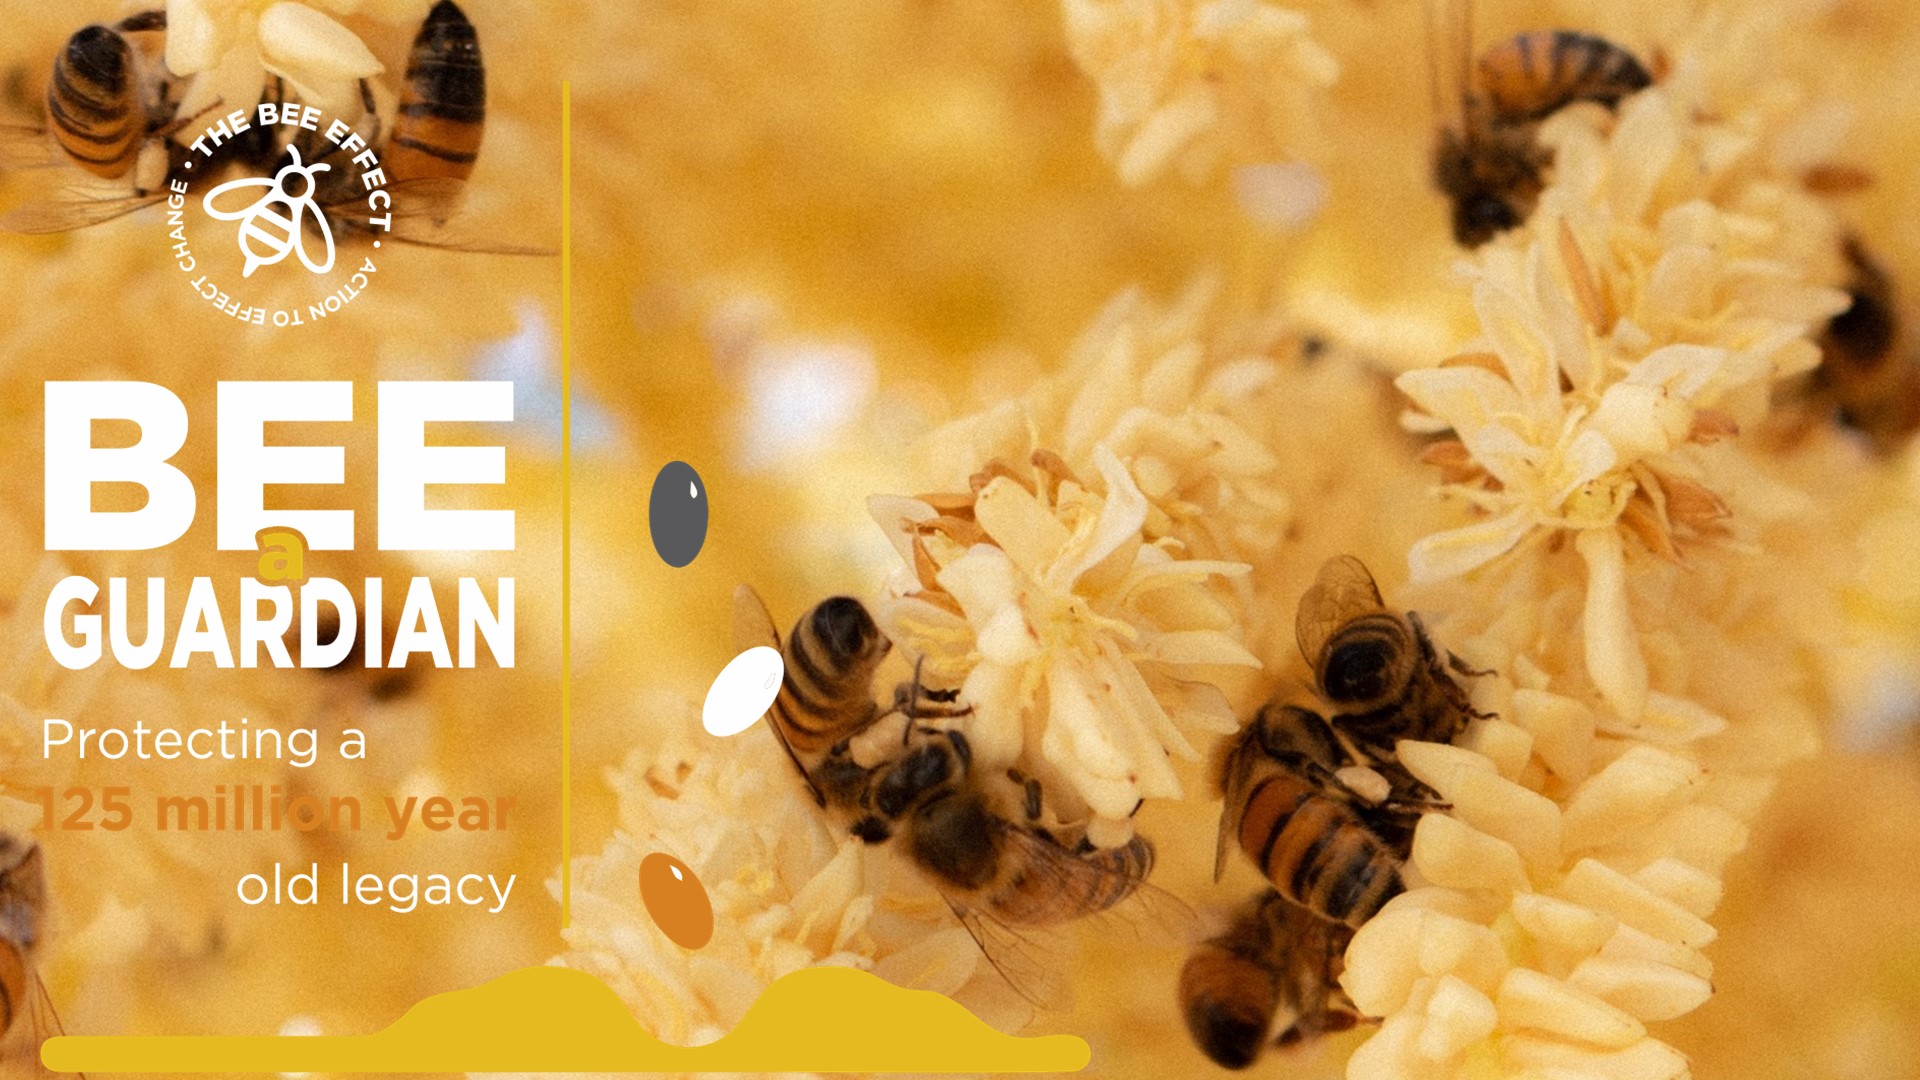 Protecting a 125-Million-Year-Old Legacy of honey bees with The Bee Effect